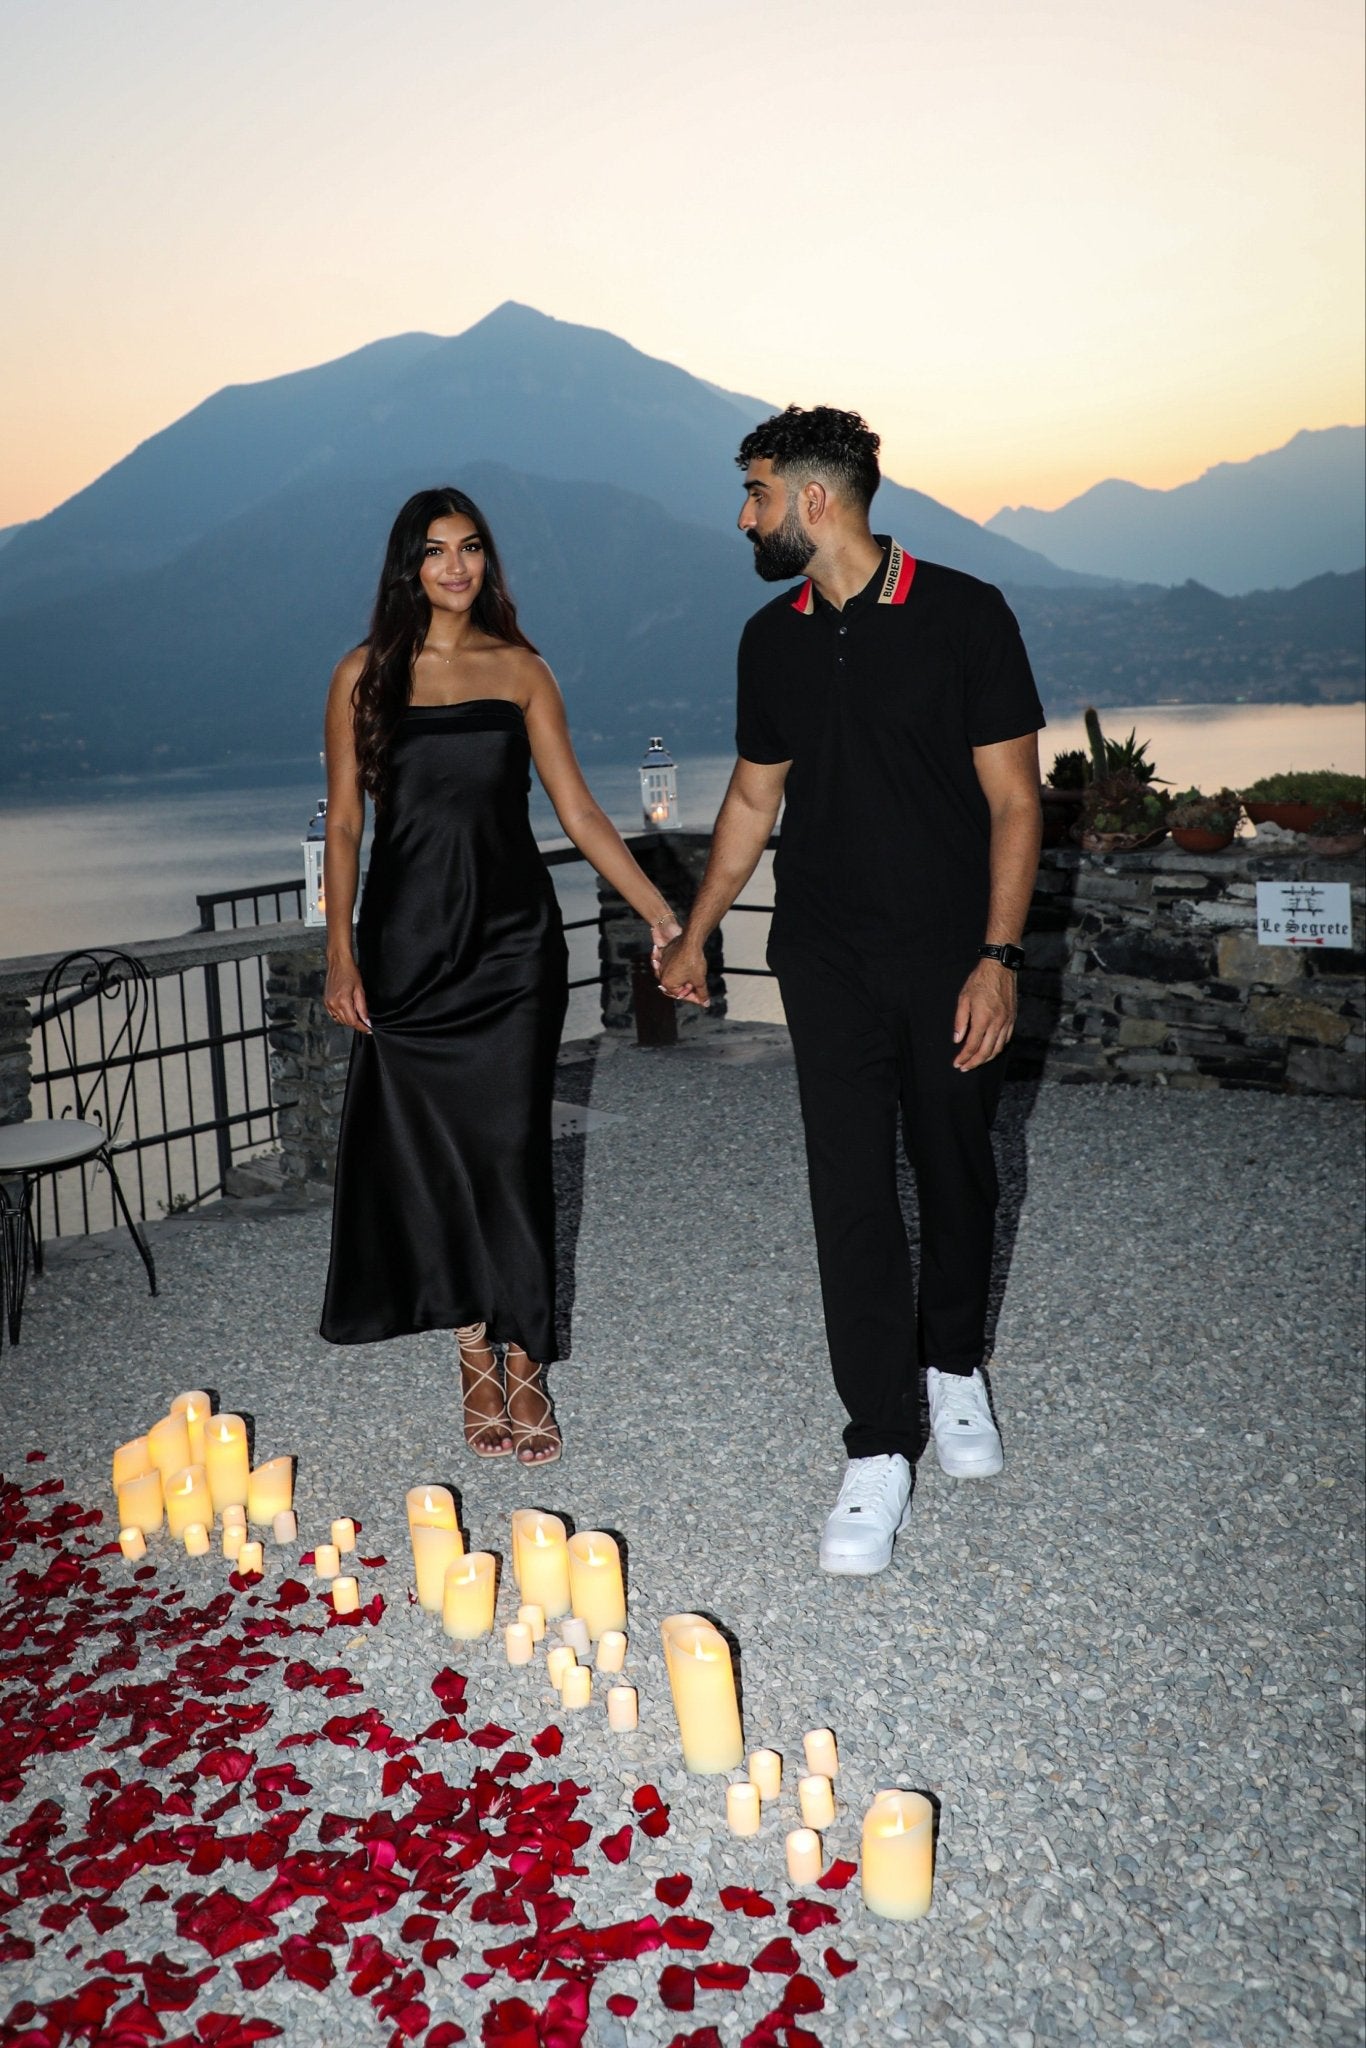 Proposal Photo Shoot at Castello di Vezio with Flowers, Food and Music - FRAQAIR